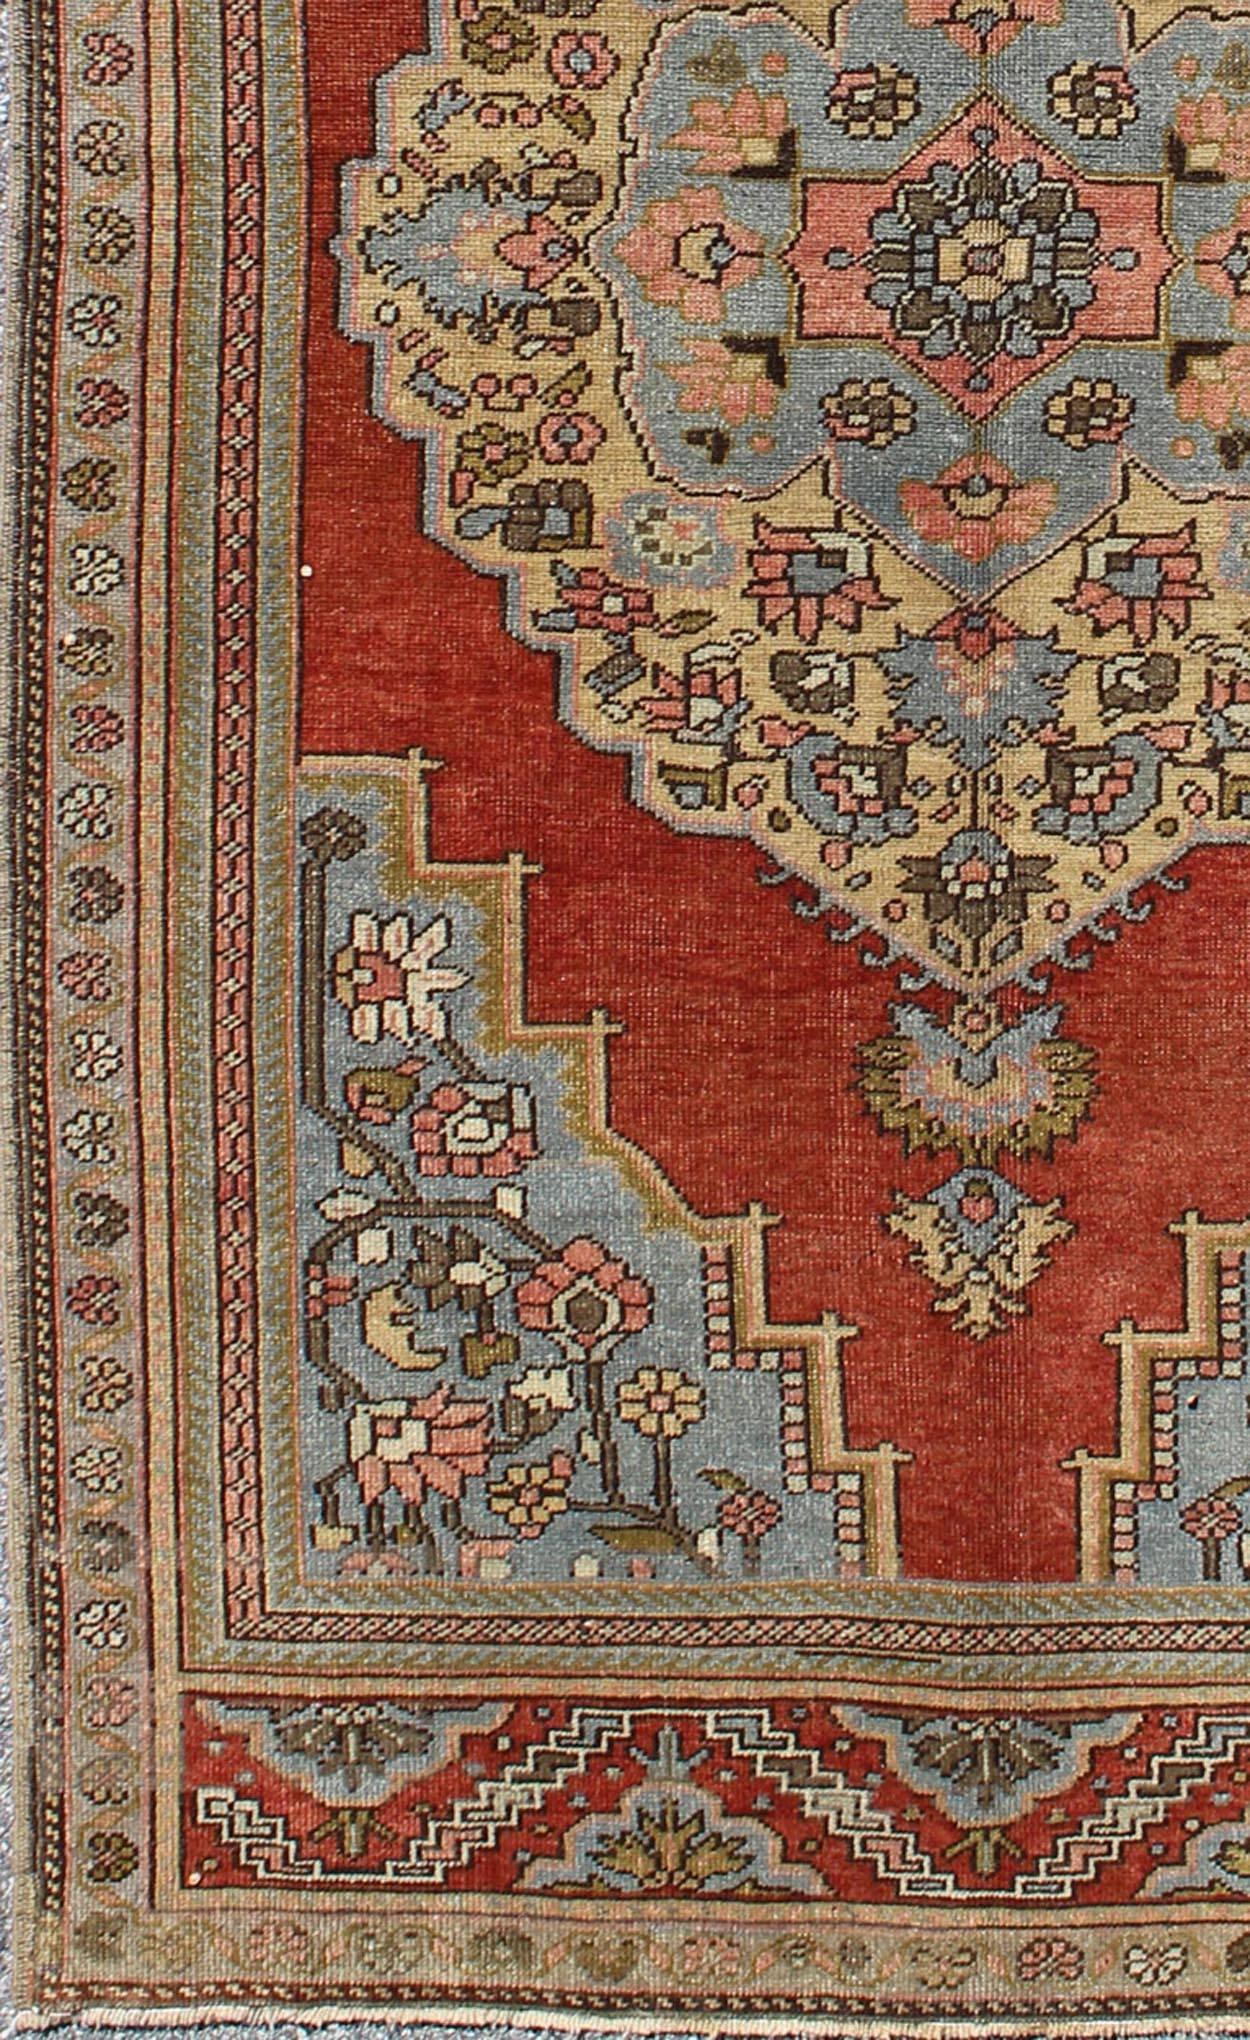 Floral Mid-Century vintage Turkish Oushak rug with medallion in red, blue, cream, rug mtu-95174, country of origin / type: Turkey / Oushak, circa mid-20th century

This vintage Turkish Oushak rug (circa mid-20th century) features a unique blend of